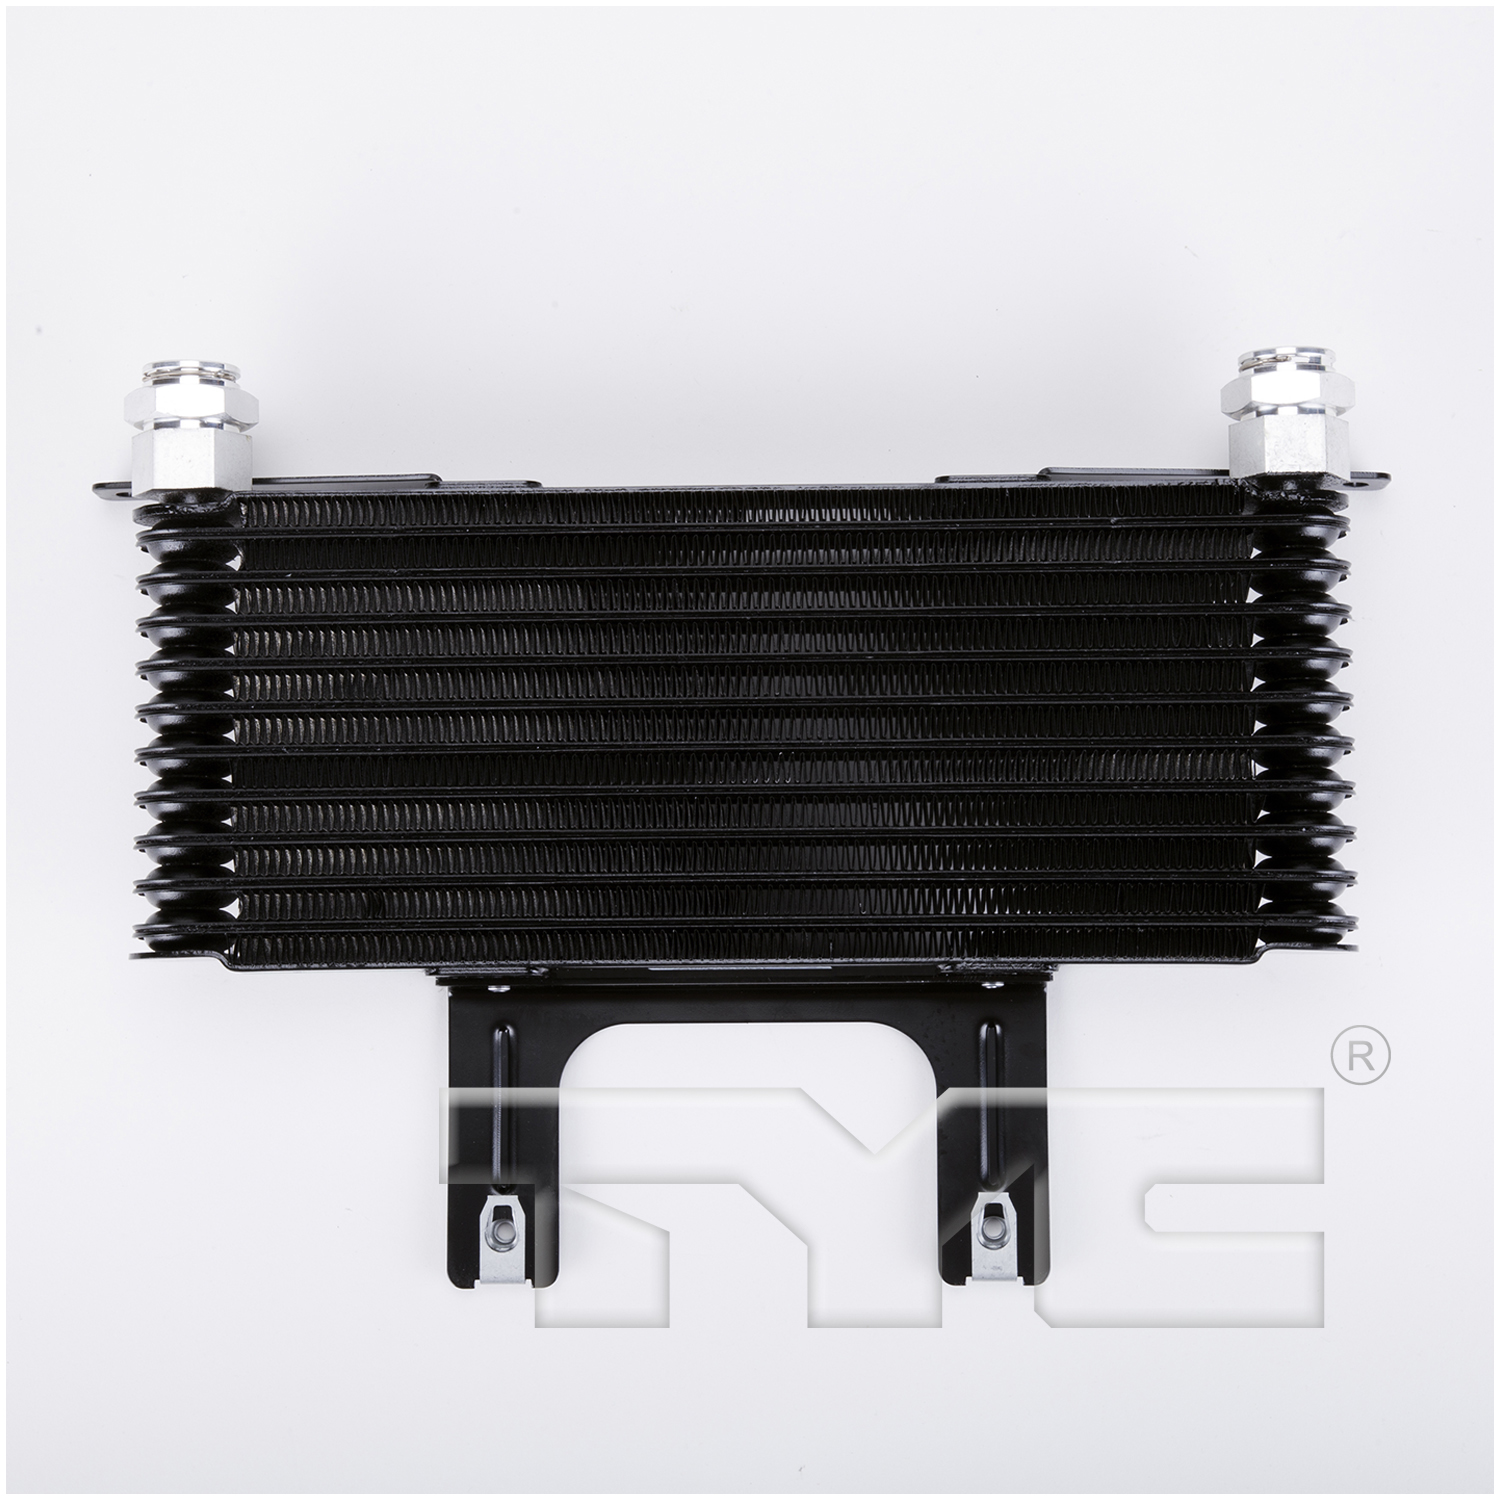 Aftermarket RADIATORS for GMC - SIERRA 2500 HD CLASSIC, SIERRA 2500 HD CLASSIC,07-07,Transmission cooler assembly